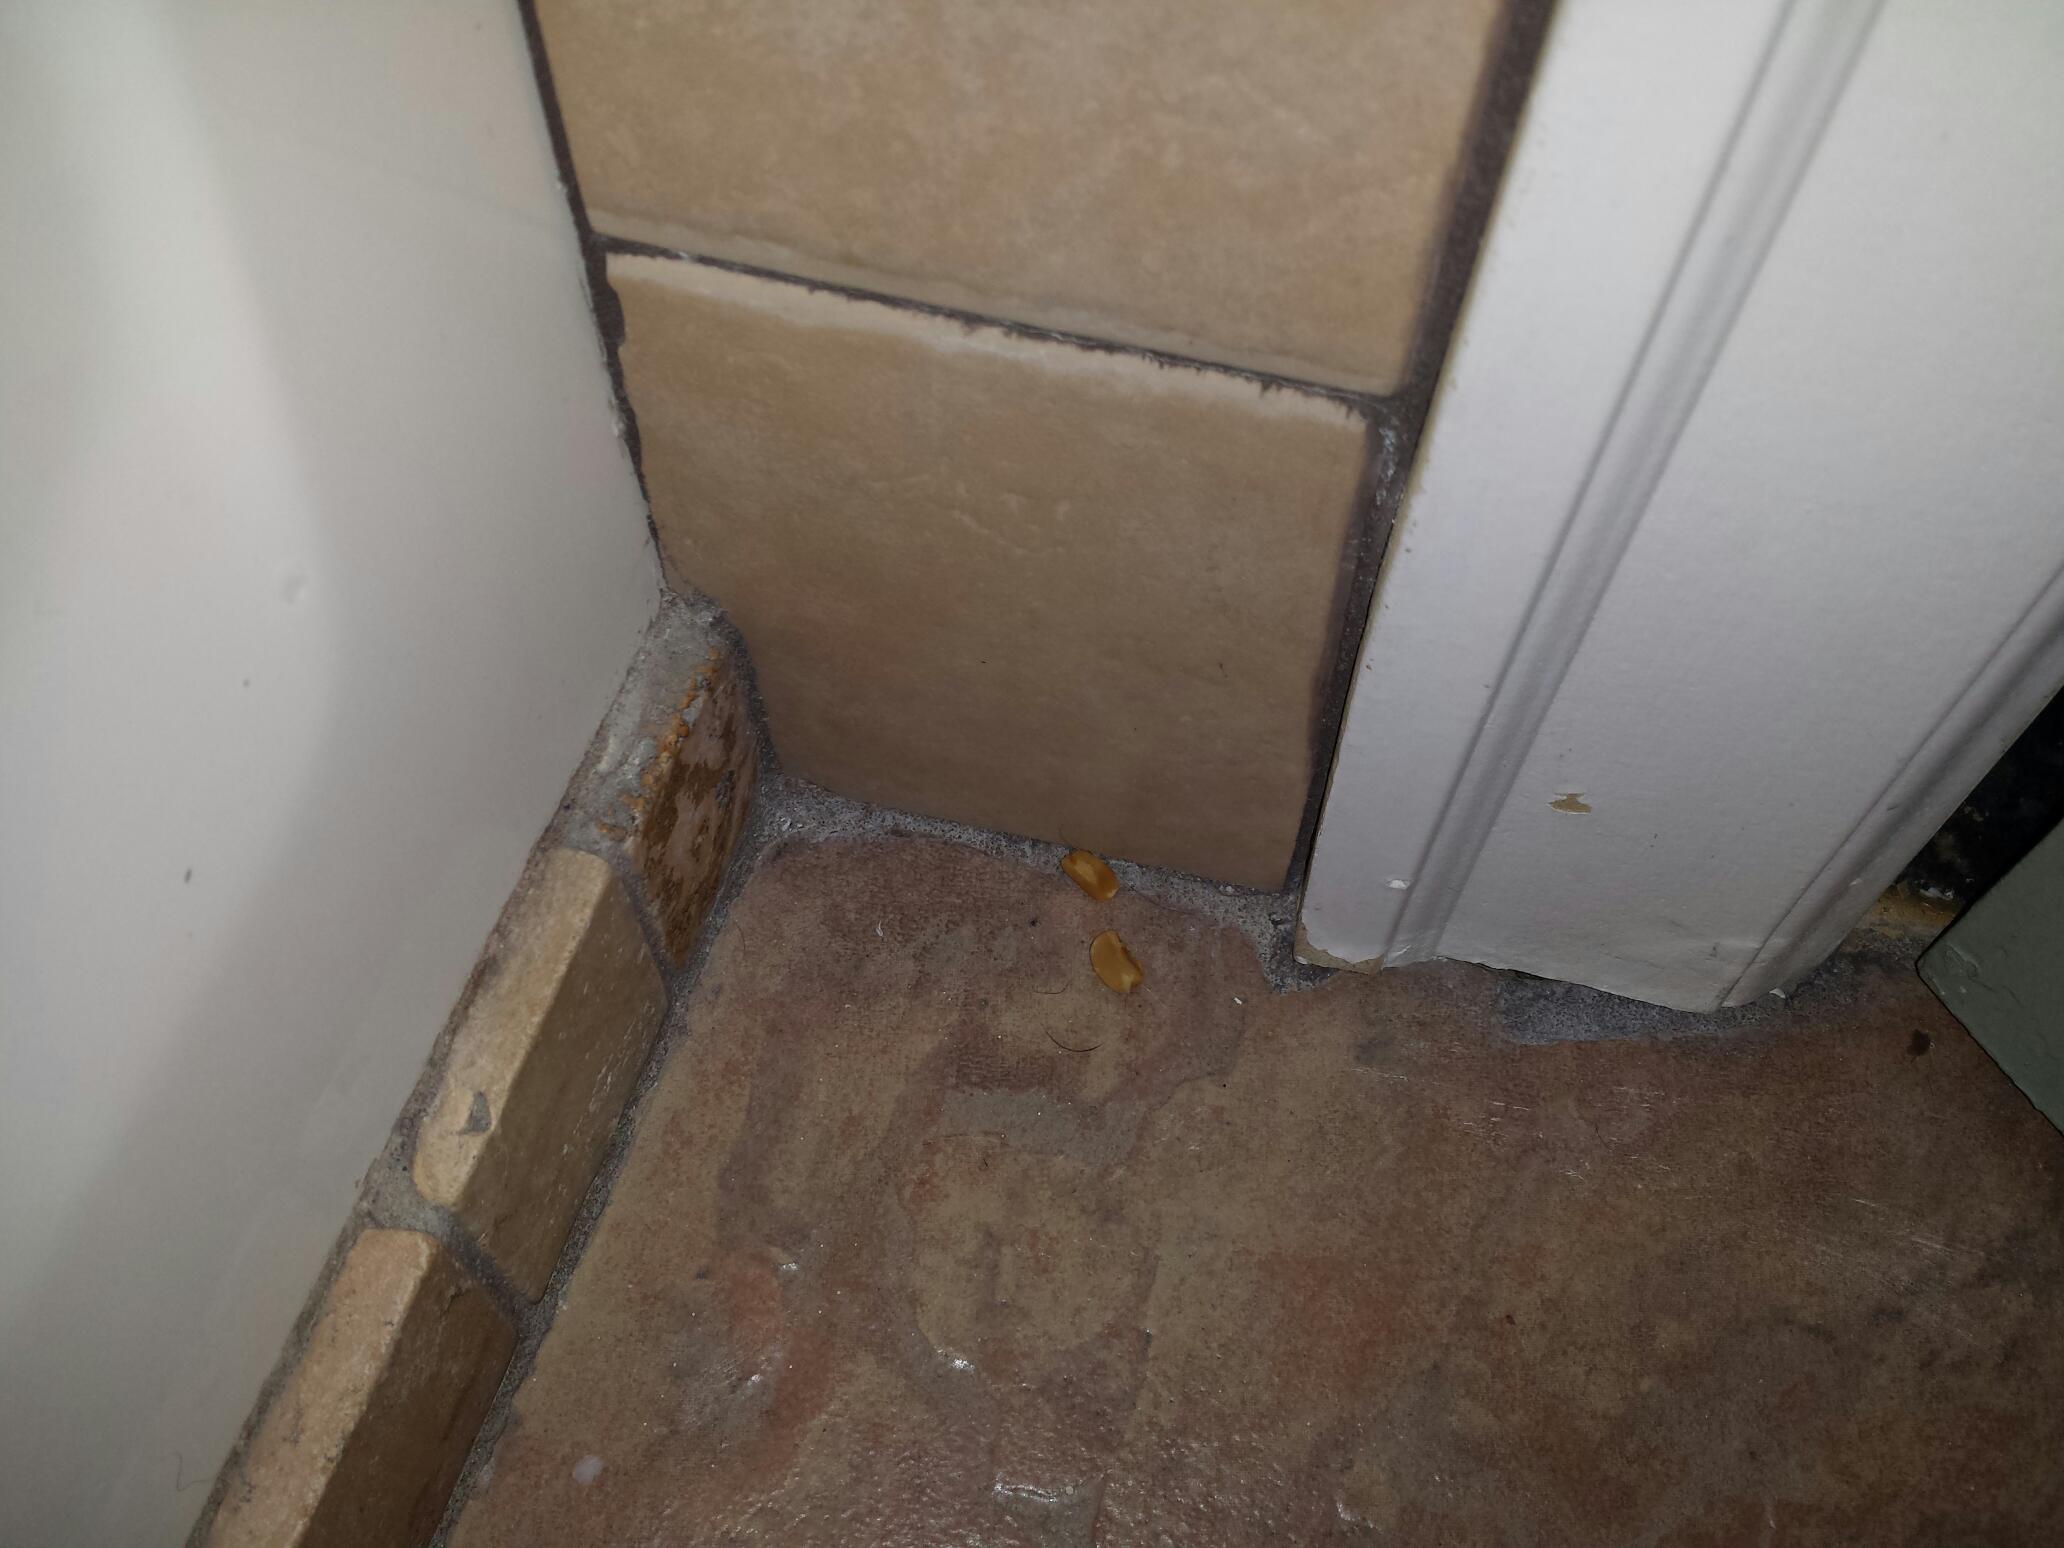 Bathroom floor with previous occupants peanuts in the corner